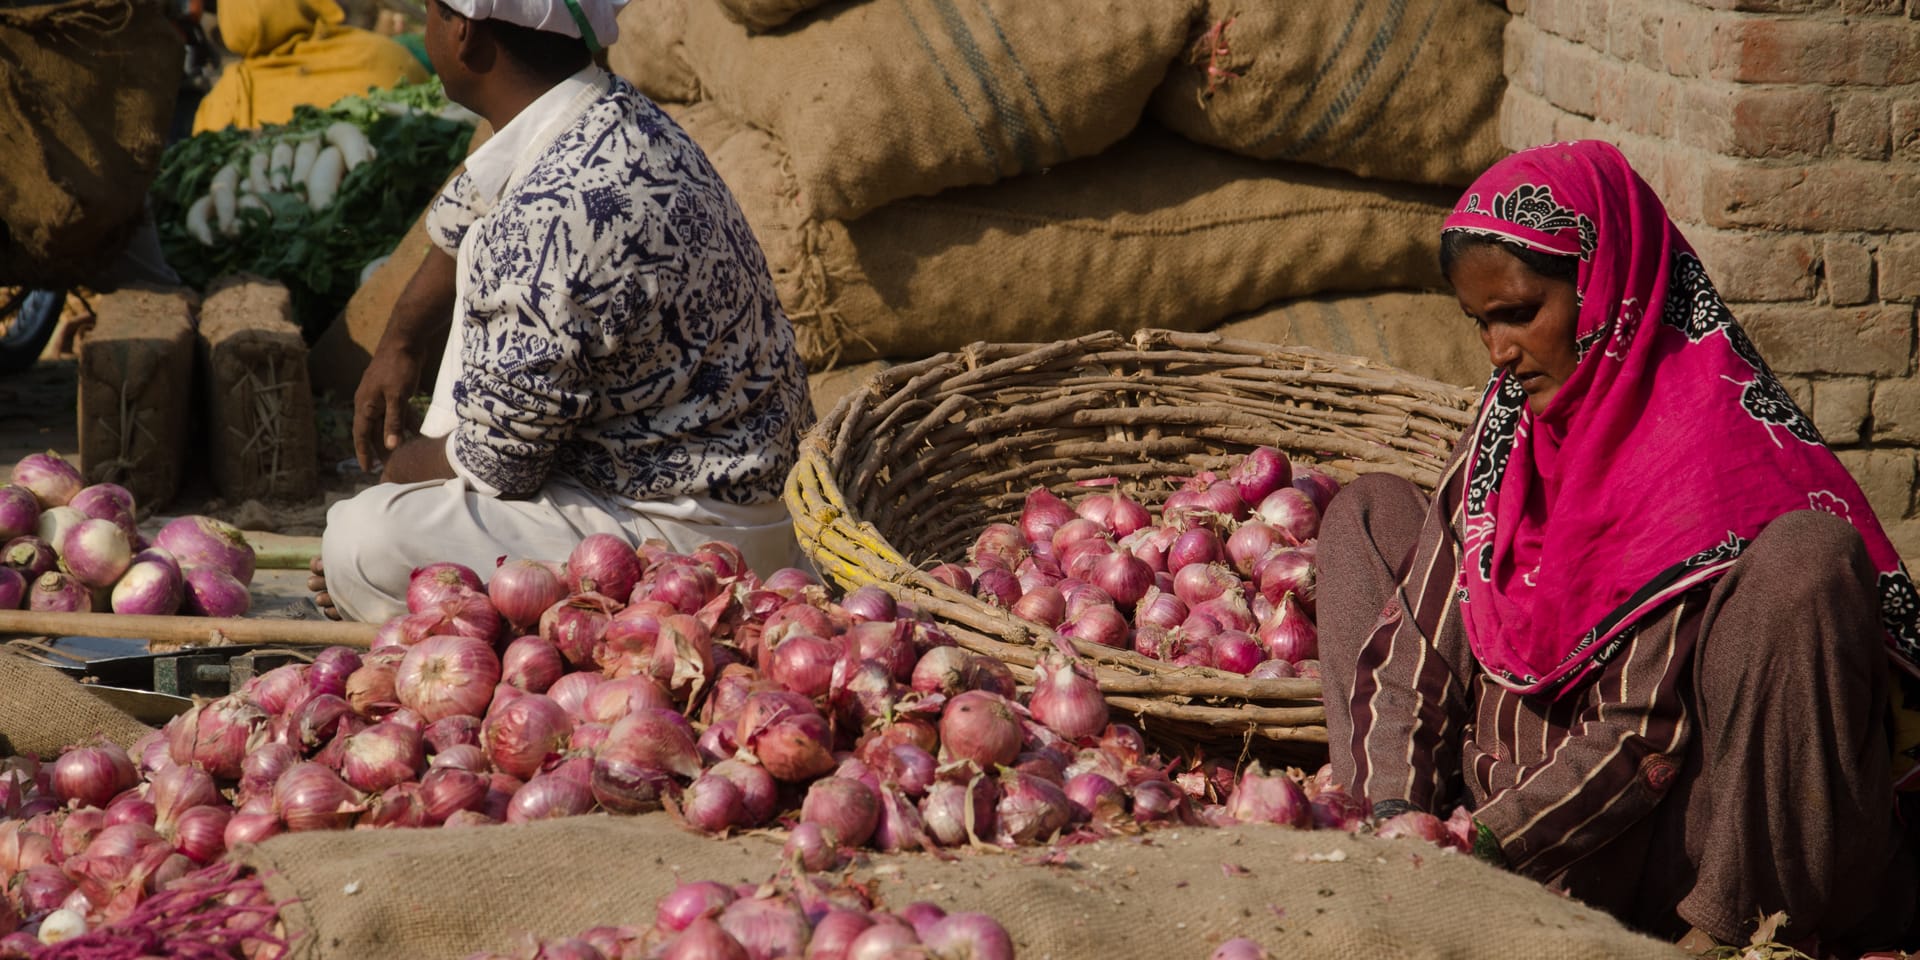 A large pile of onions with a woman sitting beside them, individually peeling them, placing them in a large basket beside her.